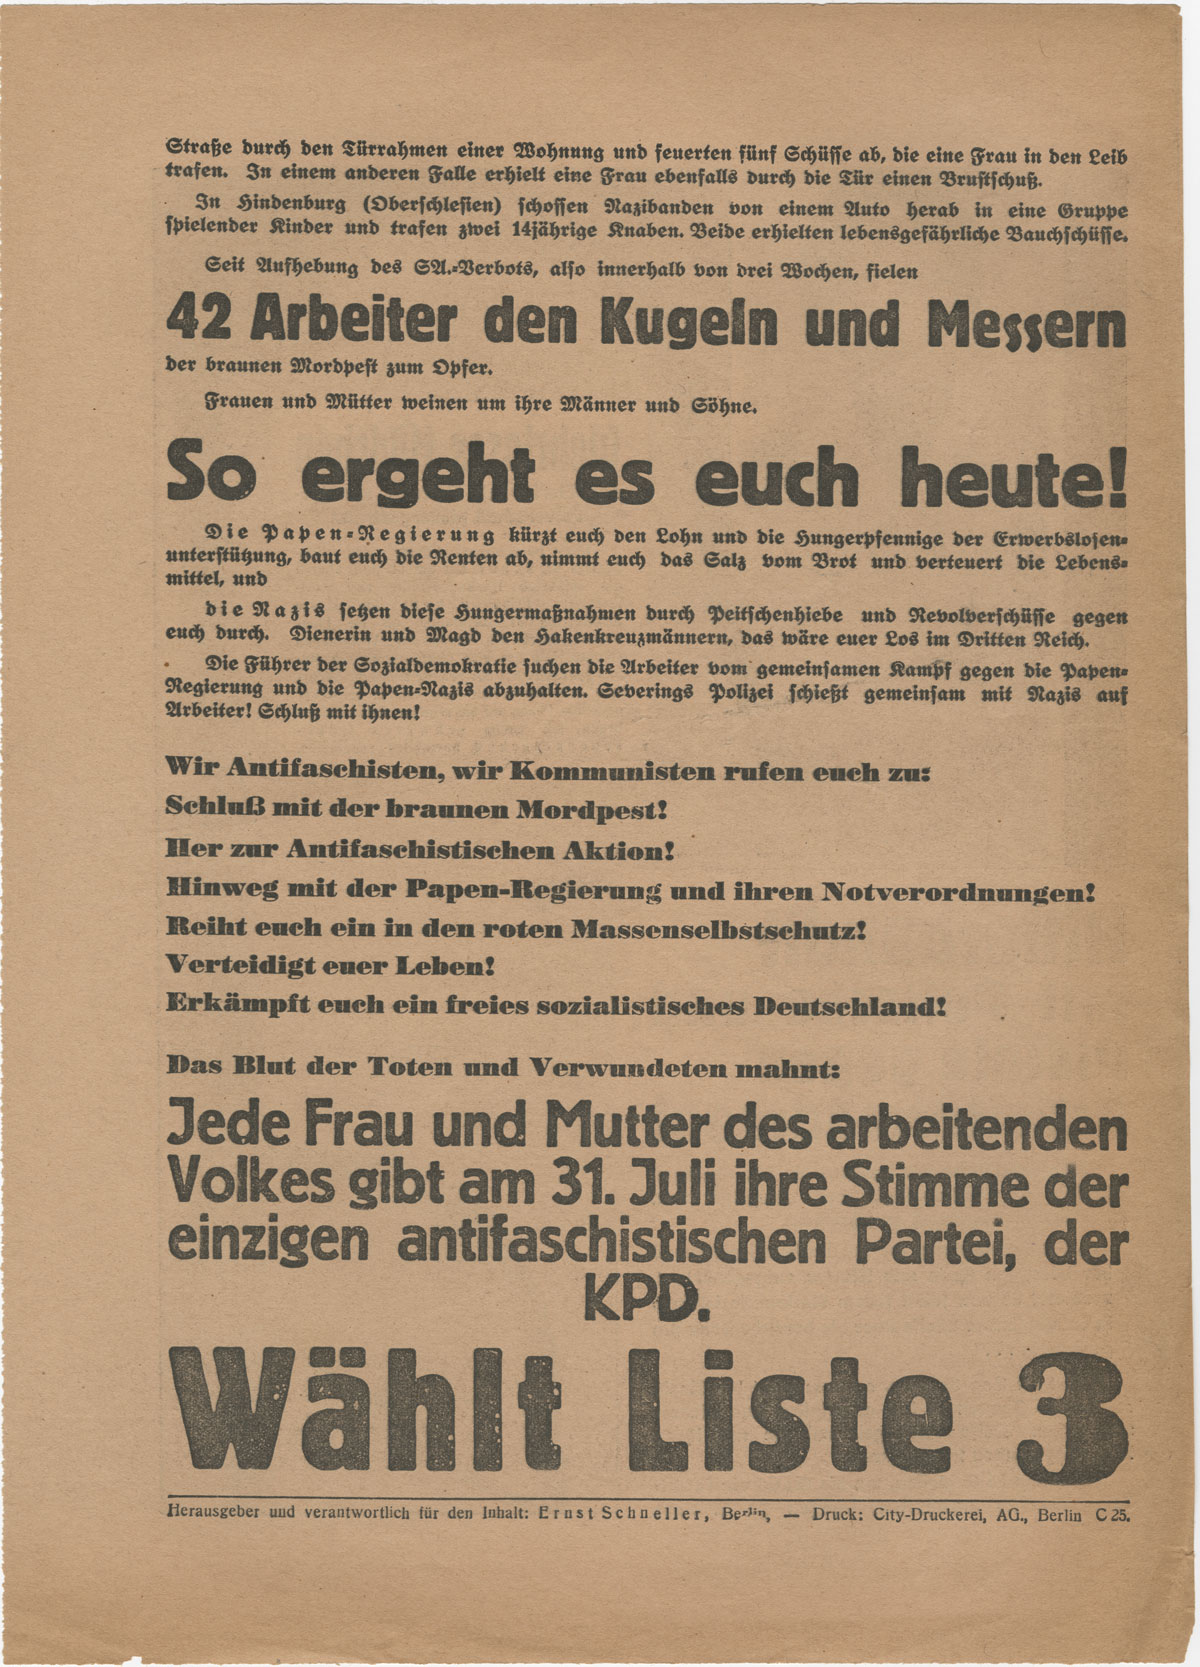 Sheet from the 1932 German elections ephemera collection.